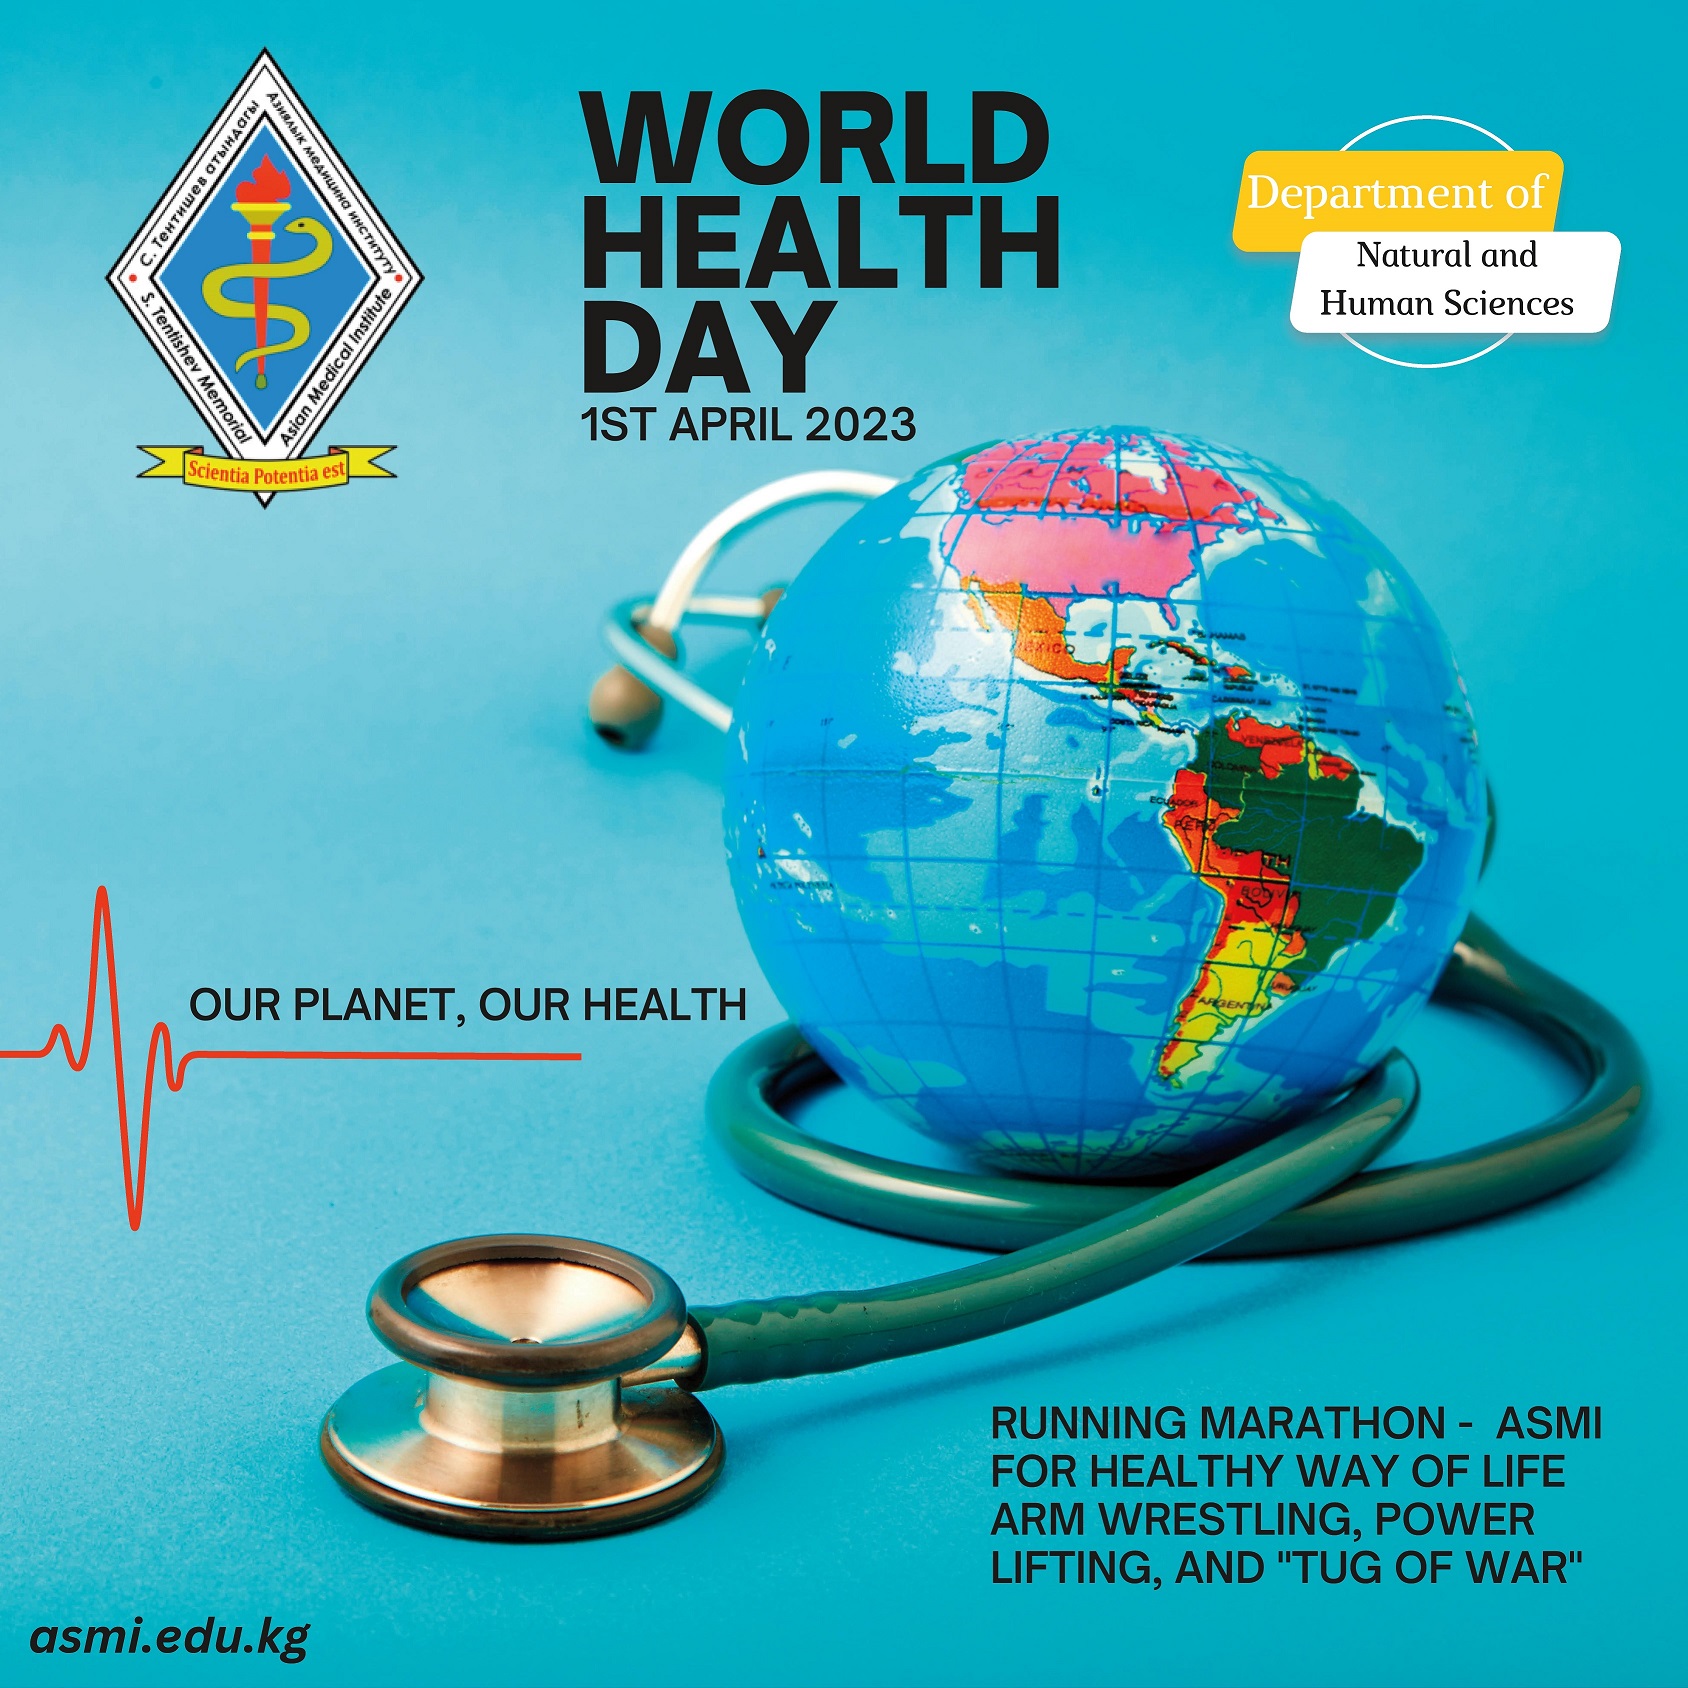 Energizing World Health Day at Asian Medical Institute: A Day of Fitness and Fun